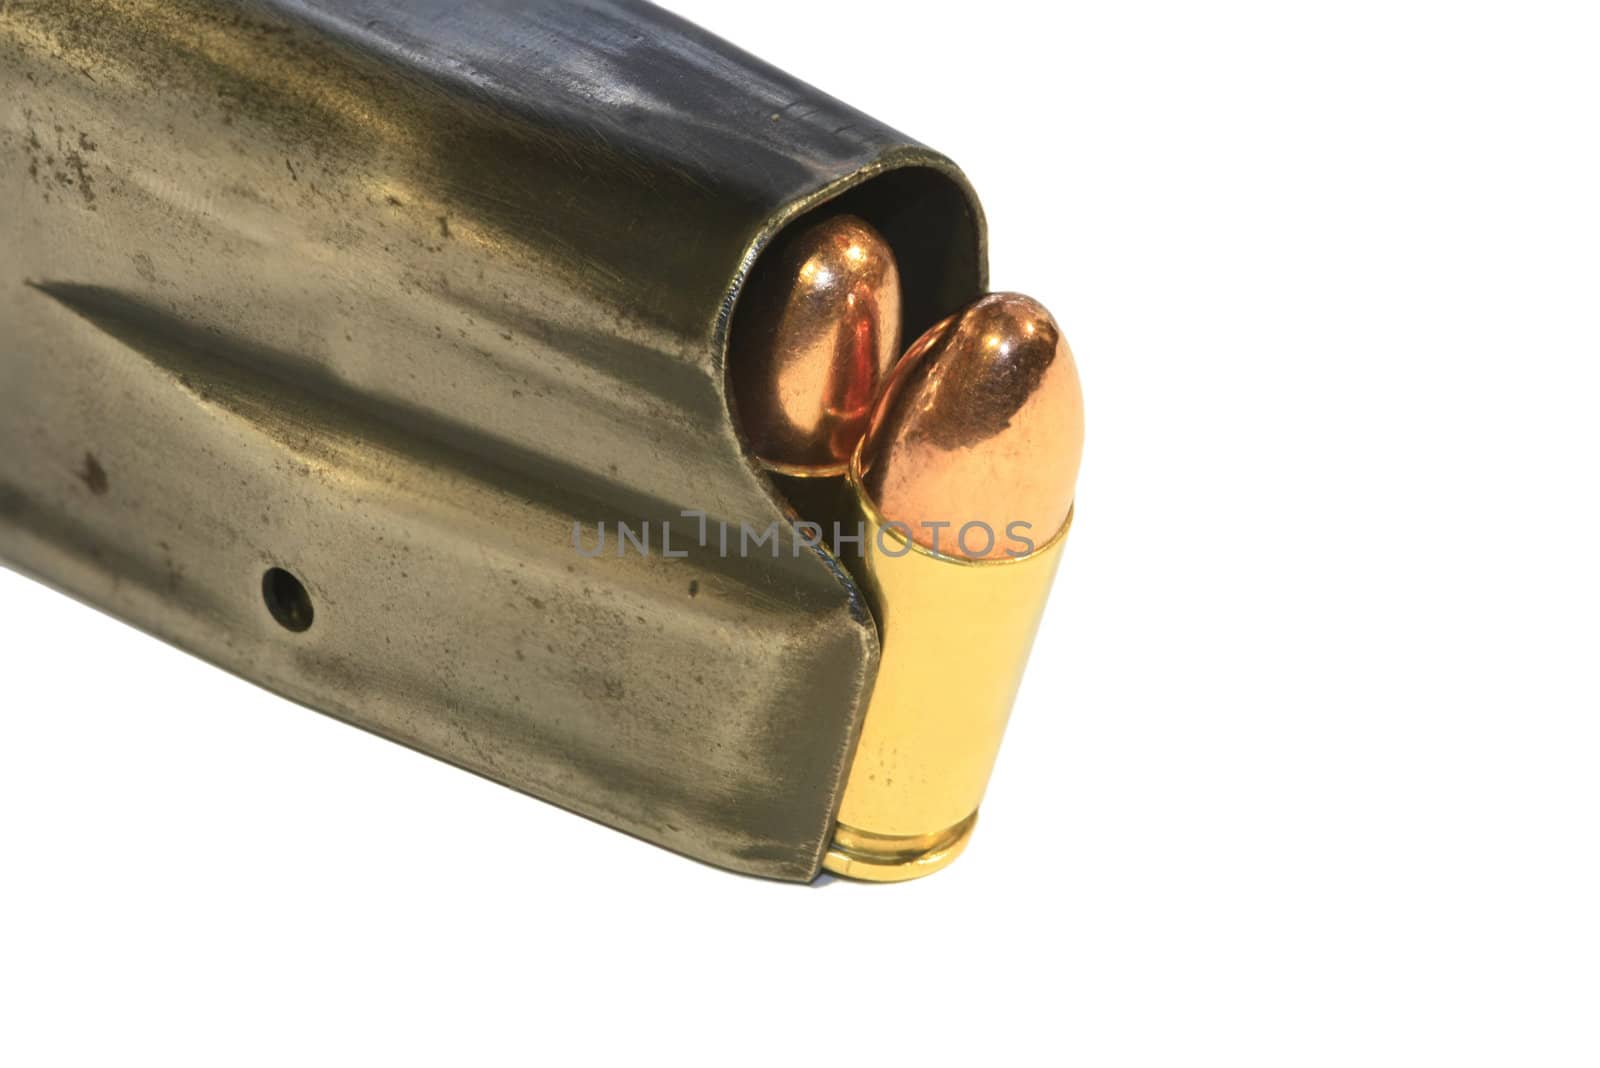 9mm bullets in a magazine